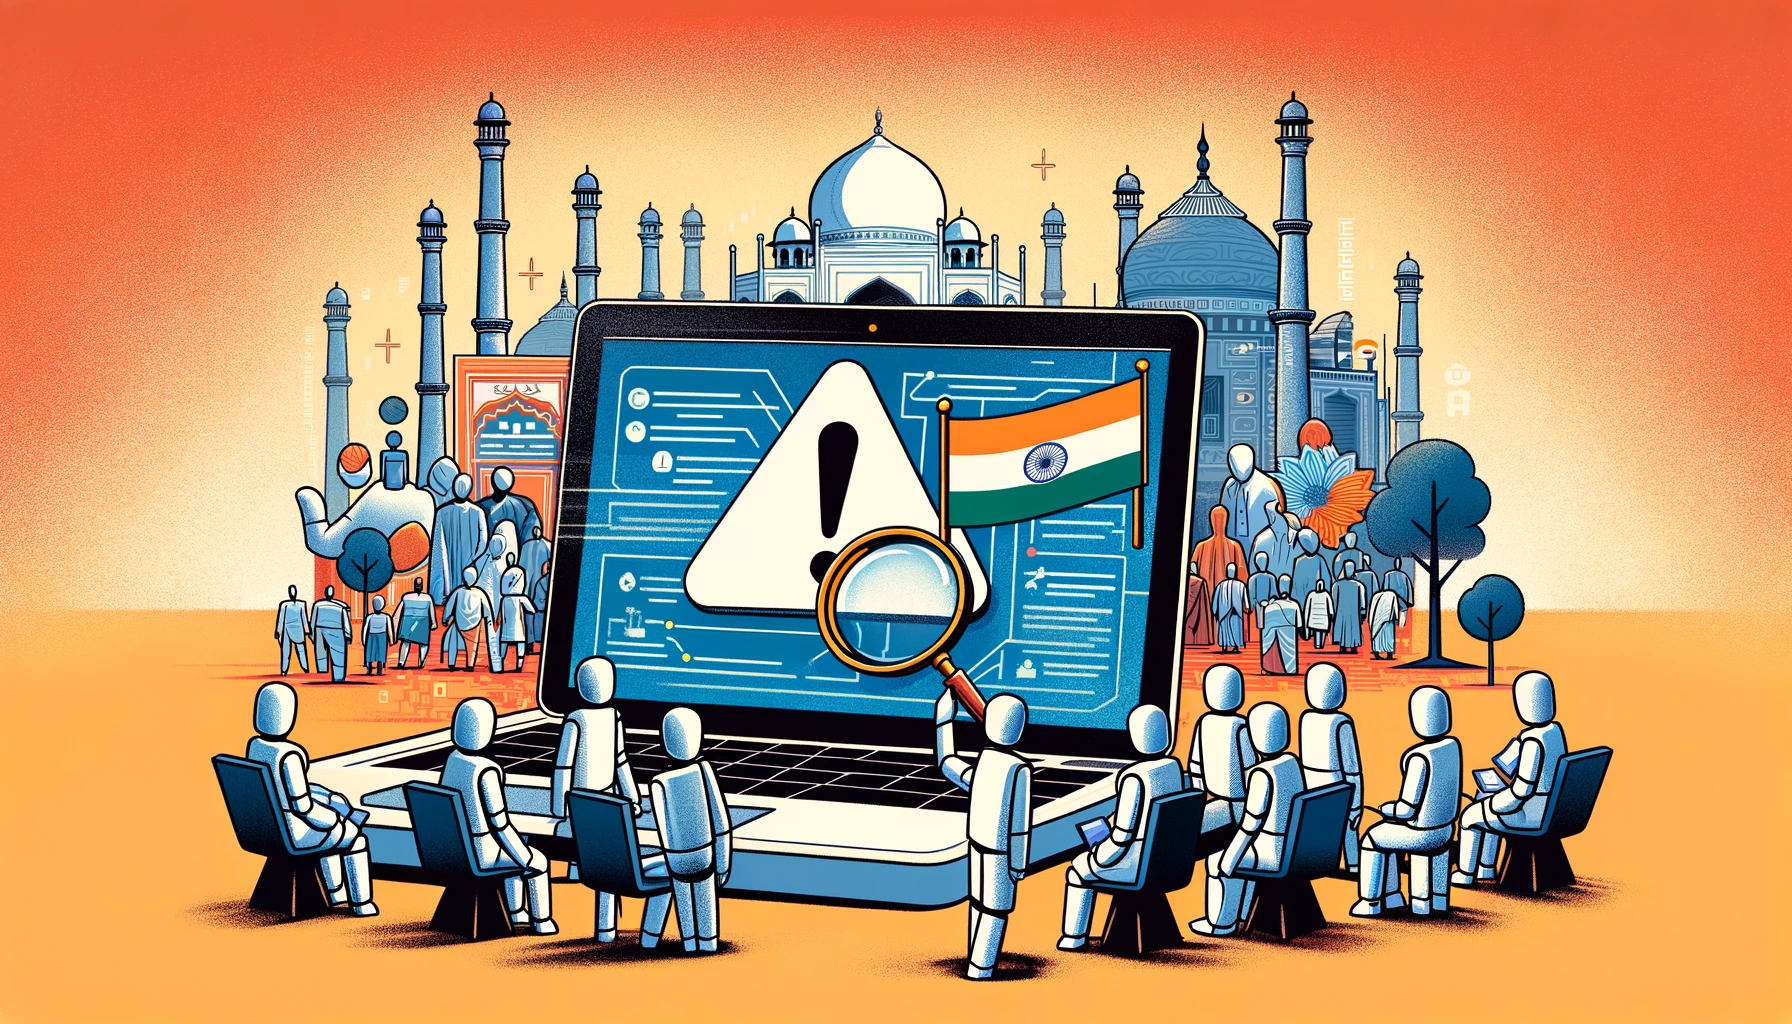 India considers countermeasures for election misinformation, including labels and an AI safety alliance.